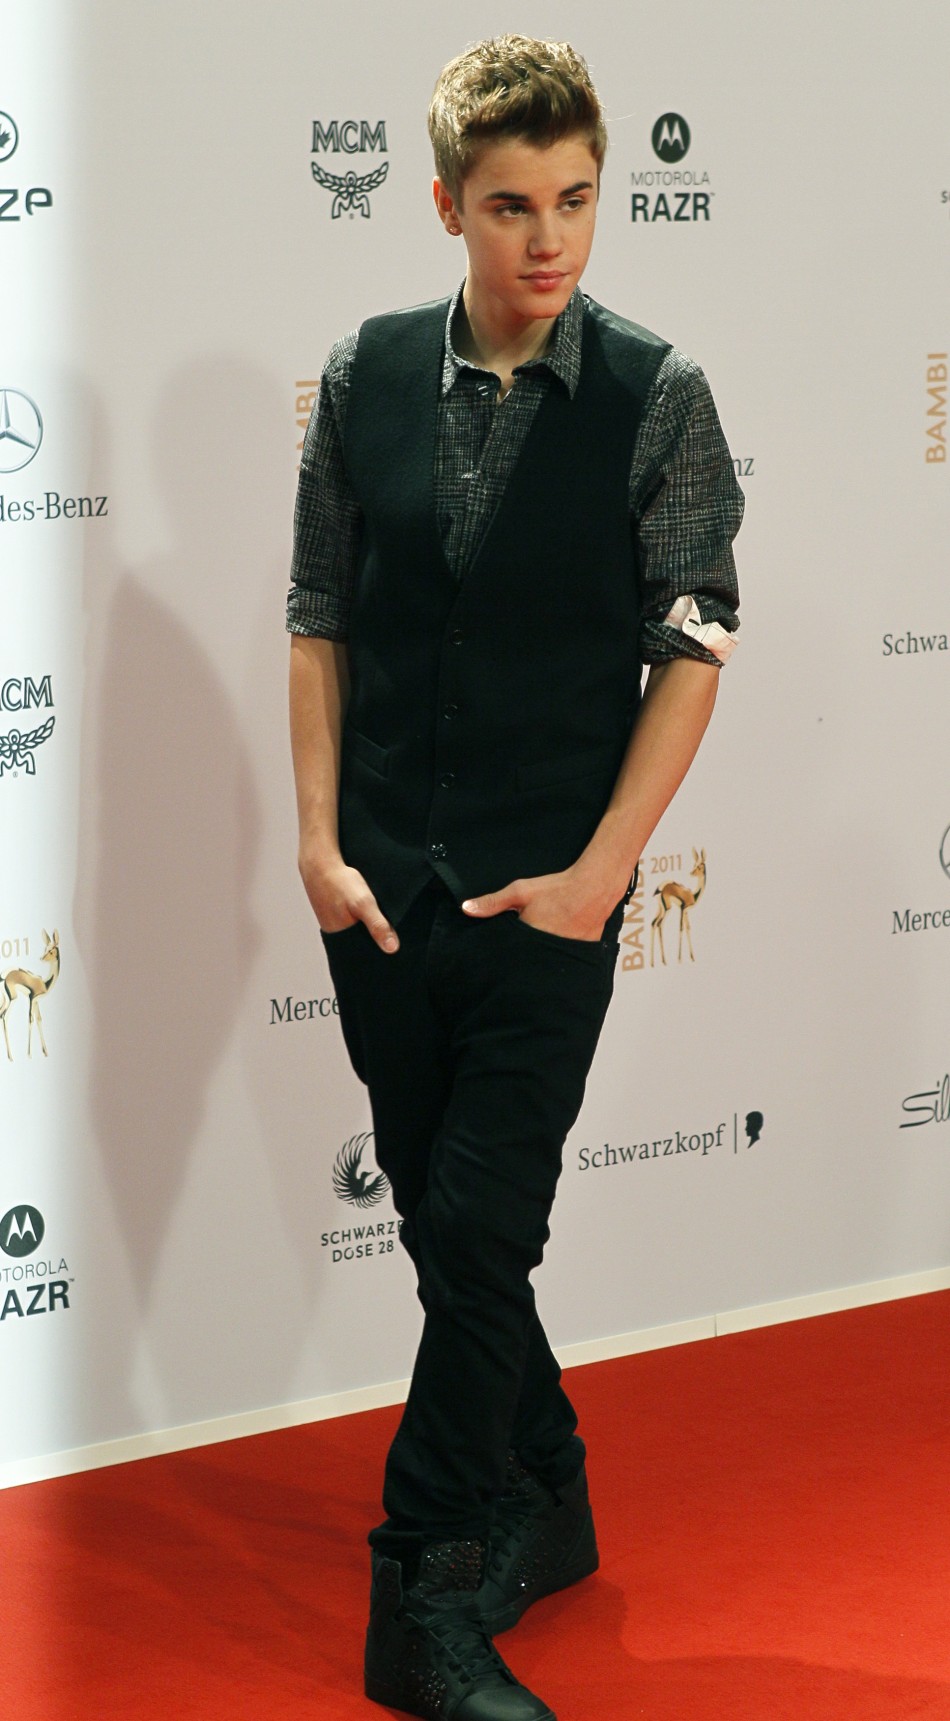 Canadian singer Justin Bieber arrives on the red carpet for the 63rd Bambi media awards ceremony in Wiesbaden